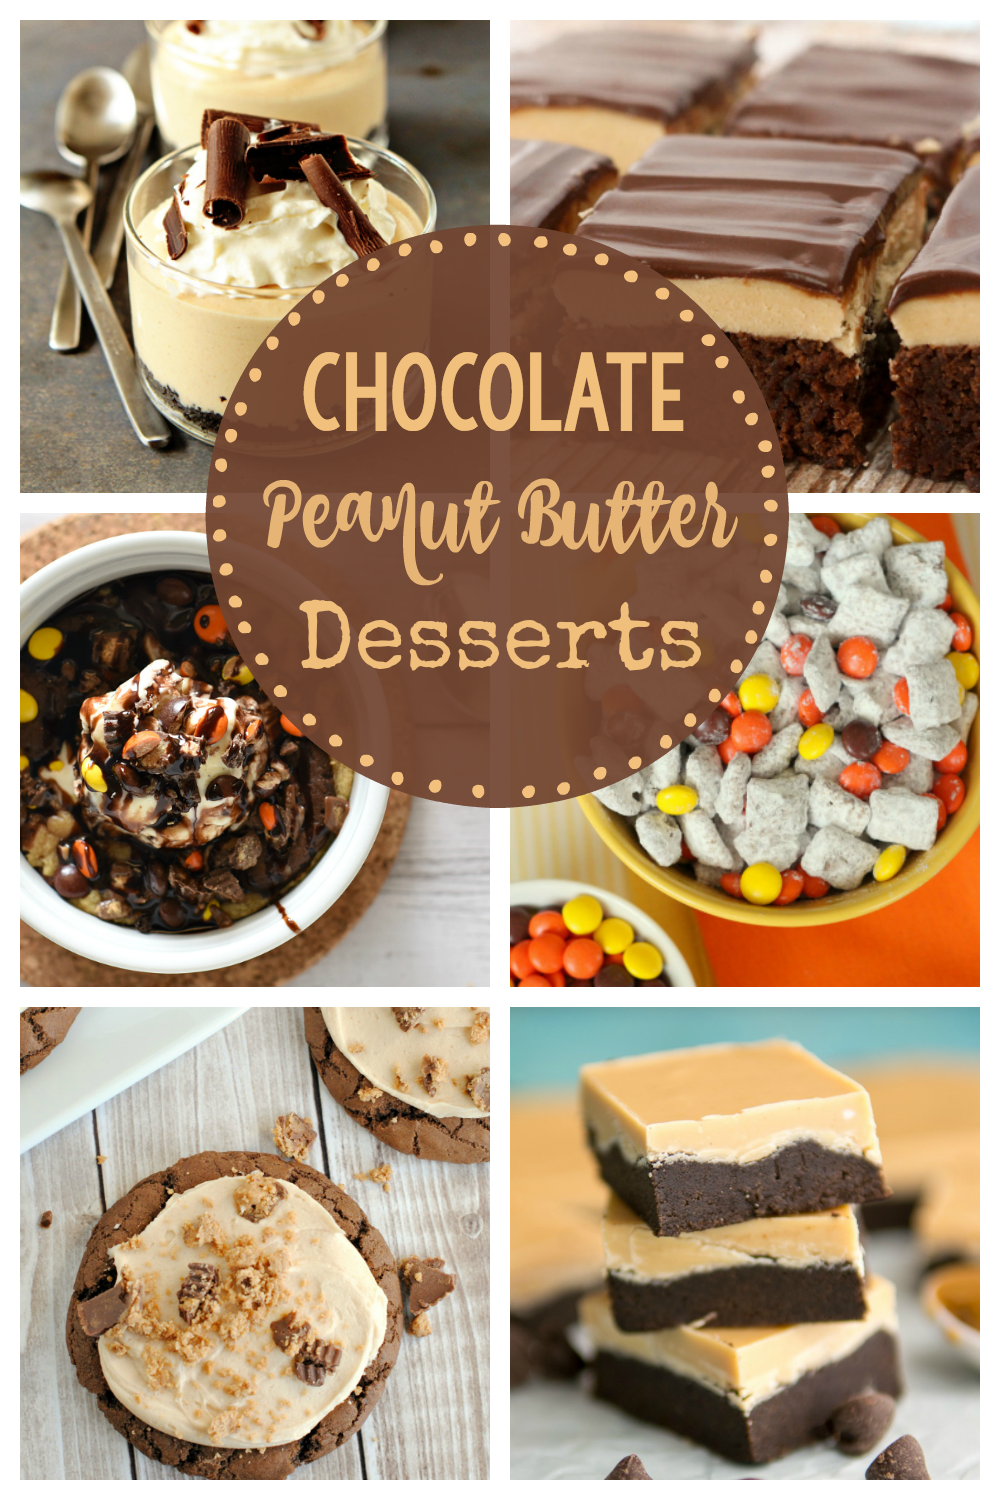 Chocolate Peanut Butter Desserts-These amazing pies, cakes, brownies, cookies, popcorn, muddy buddies and more will have you swooning with chocolate peanut butter dessert love. #chocolatepeanutbutter #dessert #desserts #chocolatepeanutbutter